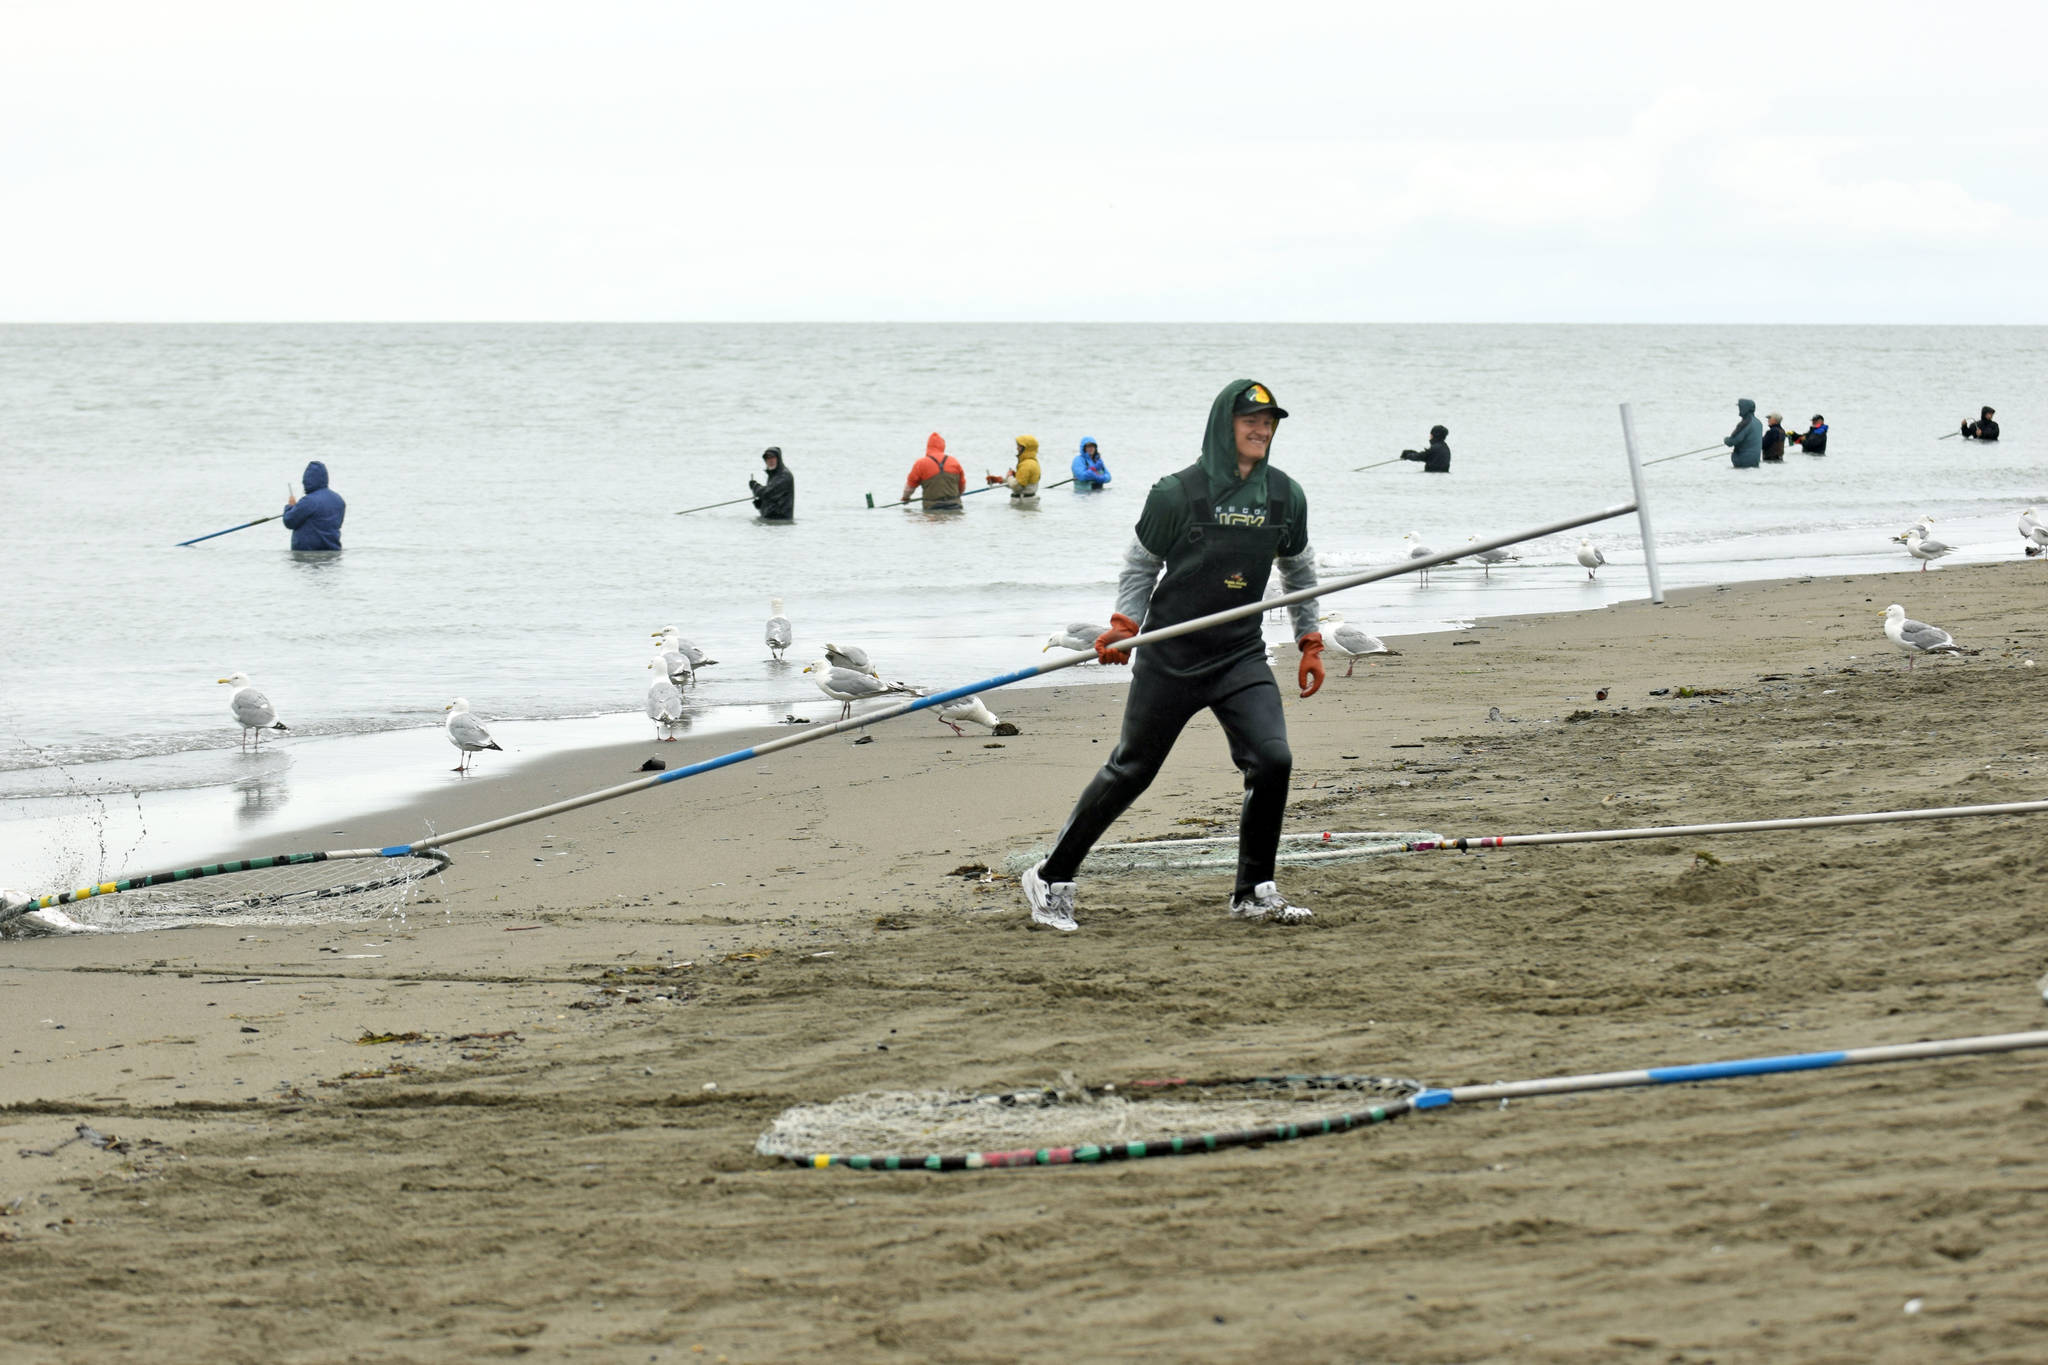 Anchorage resident Colton Herman drags his catch onto Kenai Beach during the opening day of dipnetting season on Tuesday, July 10, 2018, in Kenai, Alaska. Herman has come to Kenai to participate in dipnetting every year since he was a child. He said the catch had been slow so far, but would continue fishing until he got his quota. (Photo by Erin Thompson/Peninsula Clarion)